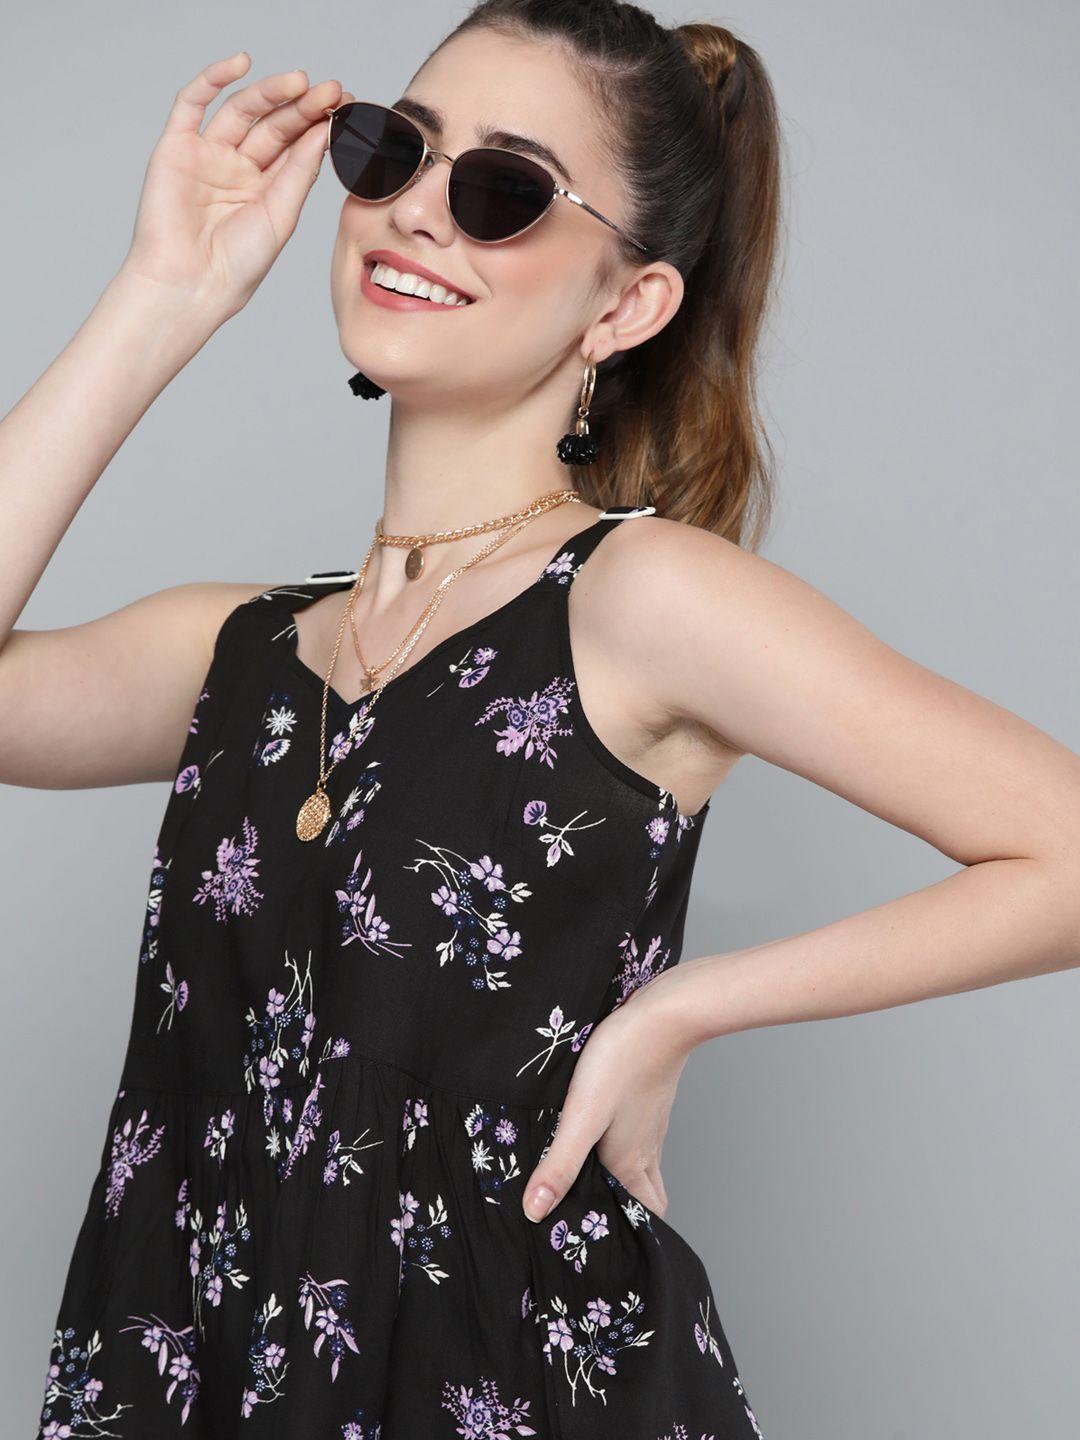 here&now women black & white floral print top